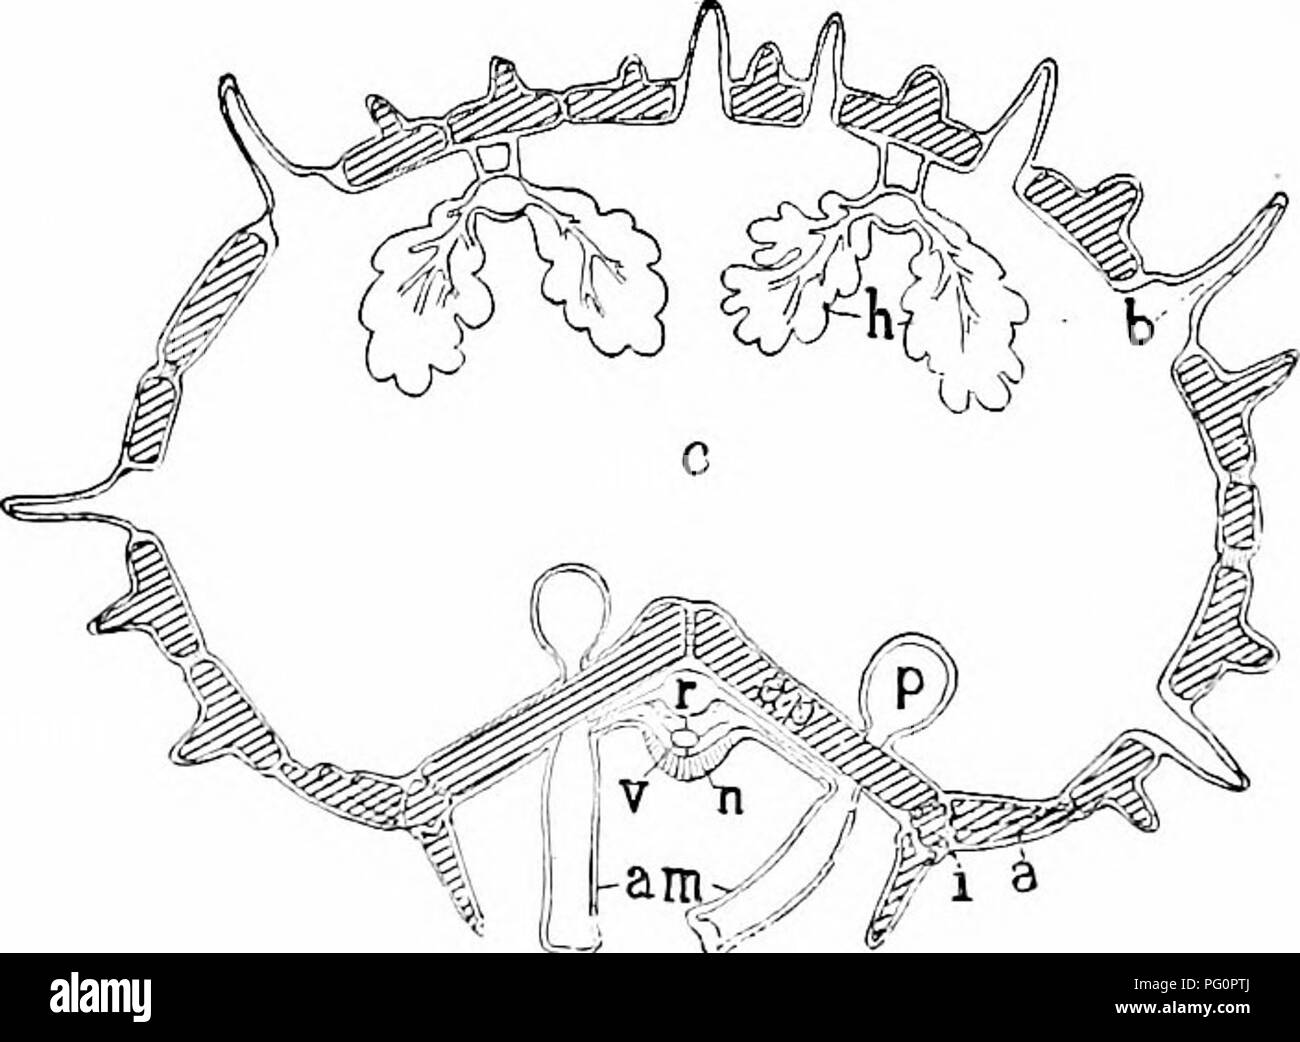 . A manual of zoology. Zoology. Fig. 285. Fig. 2S6. Fig. 2S5.—Comet form of Linckiamultiflora (f rem Korschelt-Heider) One of the arms is producing a new animal by budding. Fig. 286.—Cukita pentangularjs, aboral view (from Ludwig). a, madreporite; 6, reflexed end of ambulacral grooves. The skin is everywhere protected by large and small plates jointed together. In life it is extremely flexible, the arms can be bent in any direction, and the animal can work its way through narrow openings. Of the skeletal pieces the amhulacral plates need special mention. These. Please note that these images ar Stock Photo